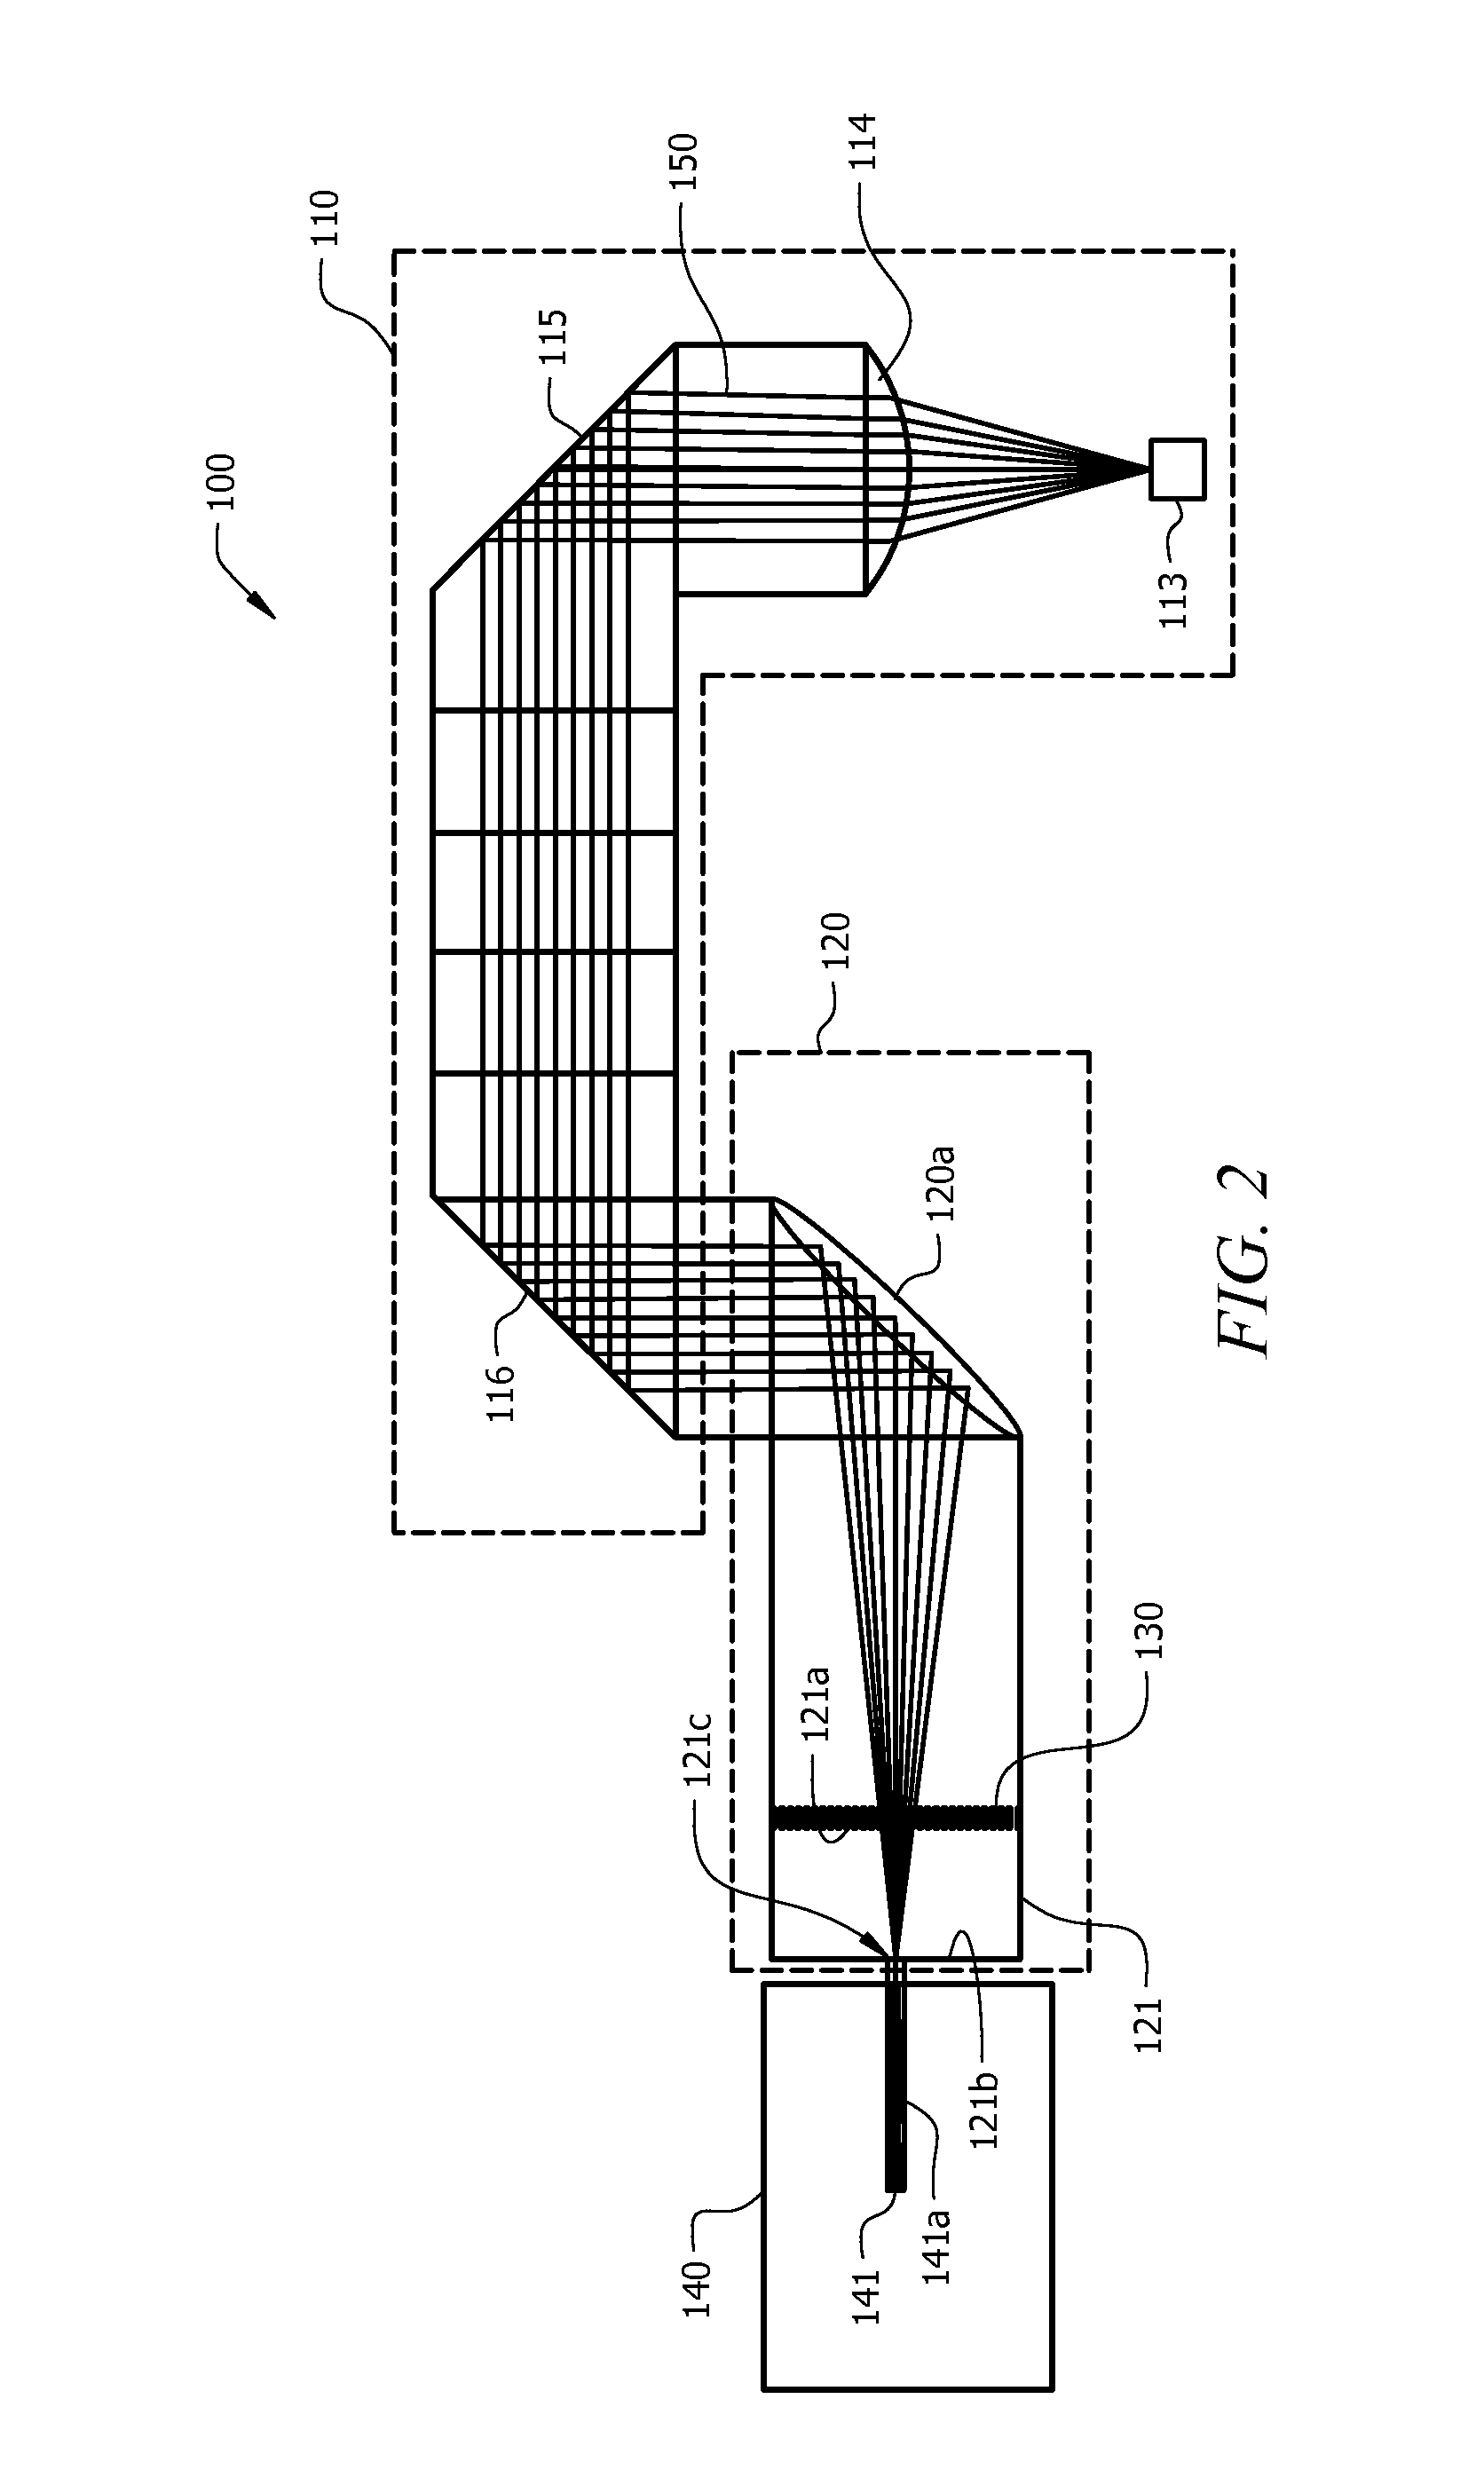 Optical coupling system for use in an optical communications module, an optical communications module that incorporates the optical coupling system, and a method